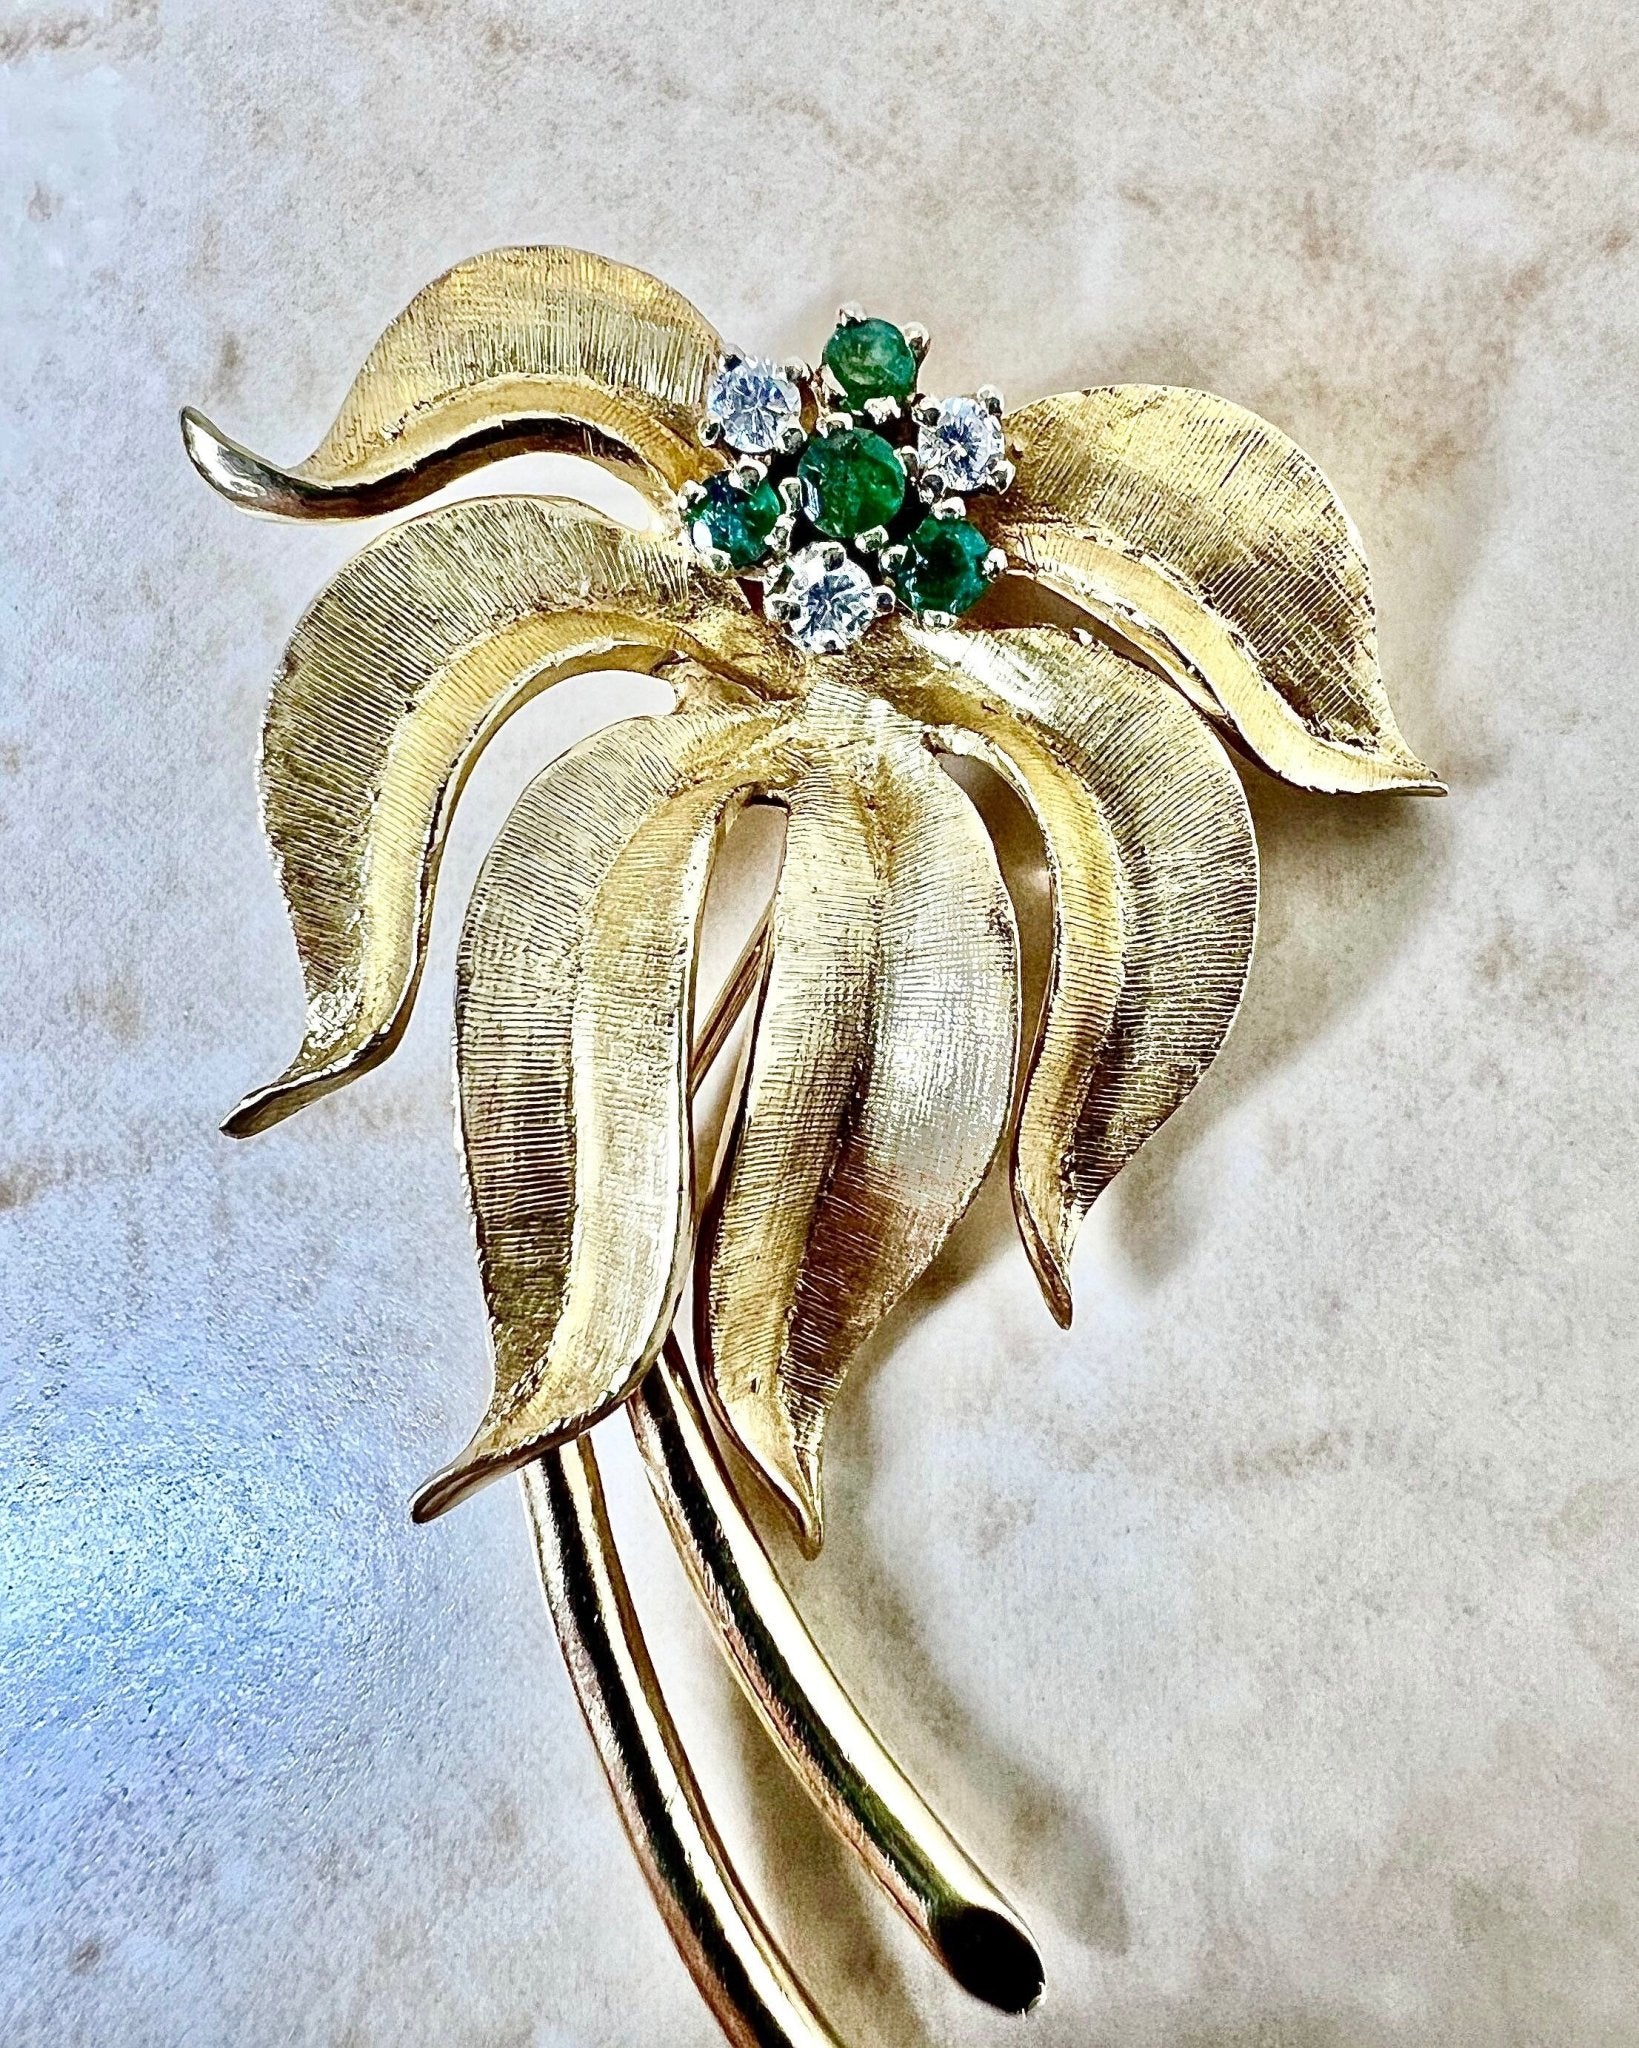 Vintage 14K Emerald & Diamond Brooch - Yellow Gold Flower Brooch - Emerald Pin - May Birthstone - Best Birthday Gift For Her - Jewelry Sale